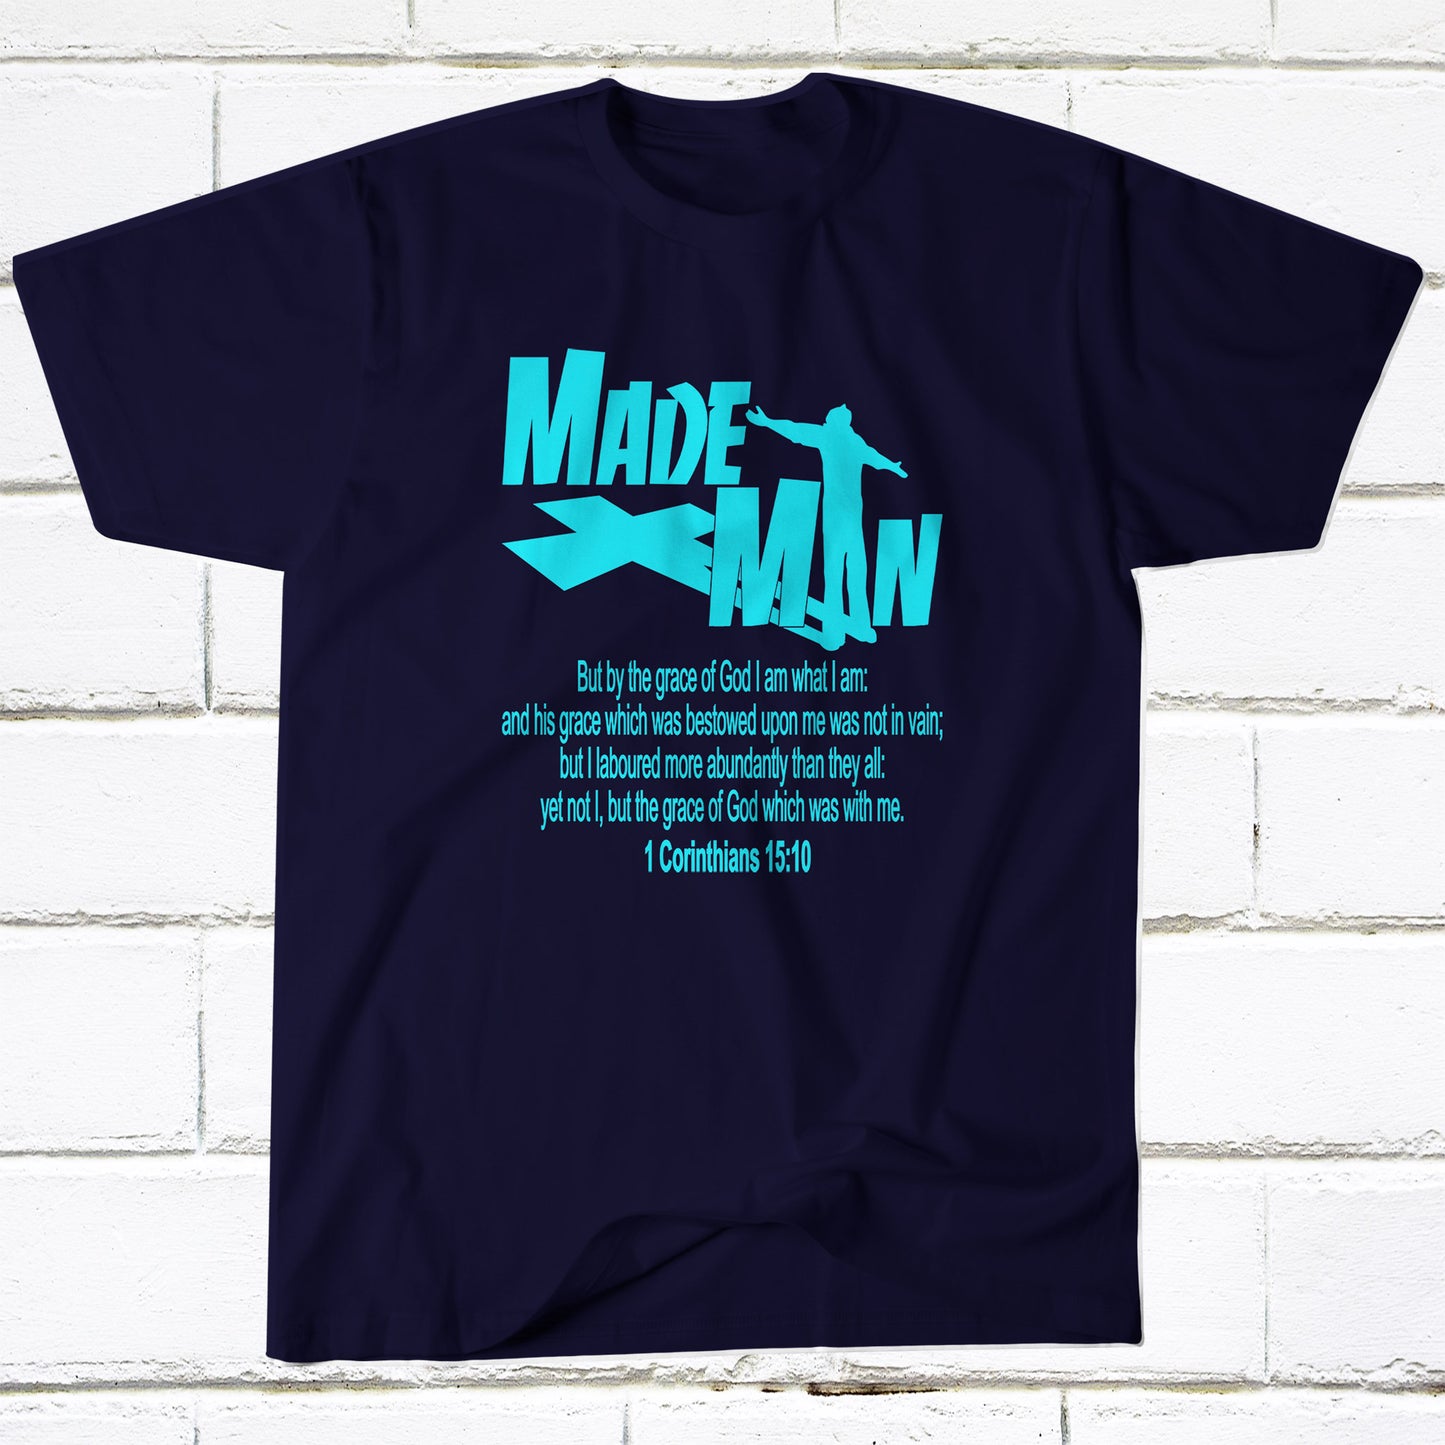 Made Man (Navy Blue) - Christian - t shirt - Anointed T Shirts